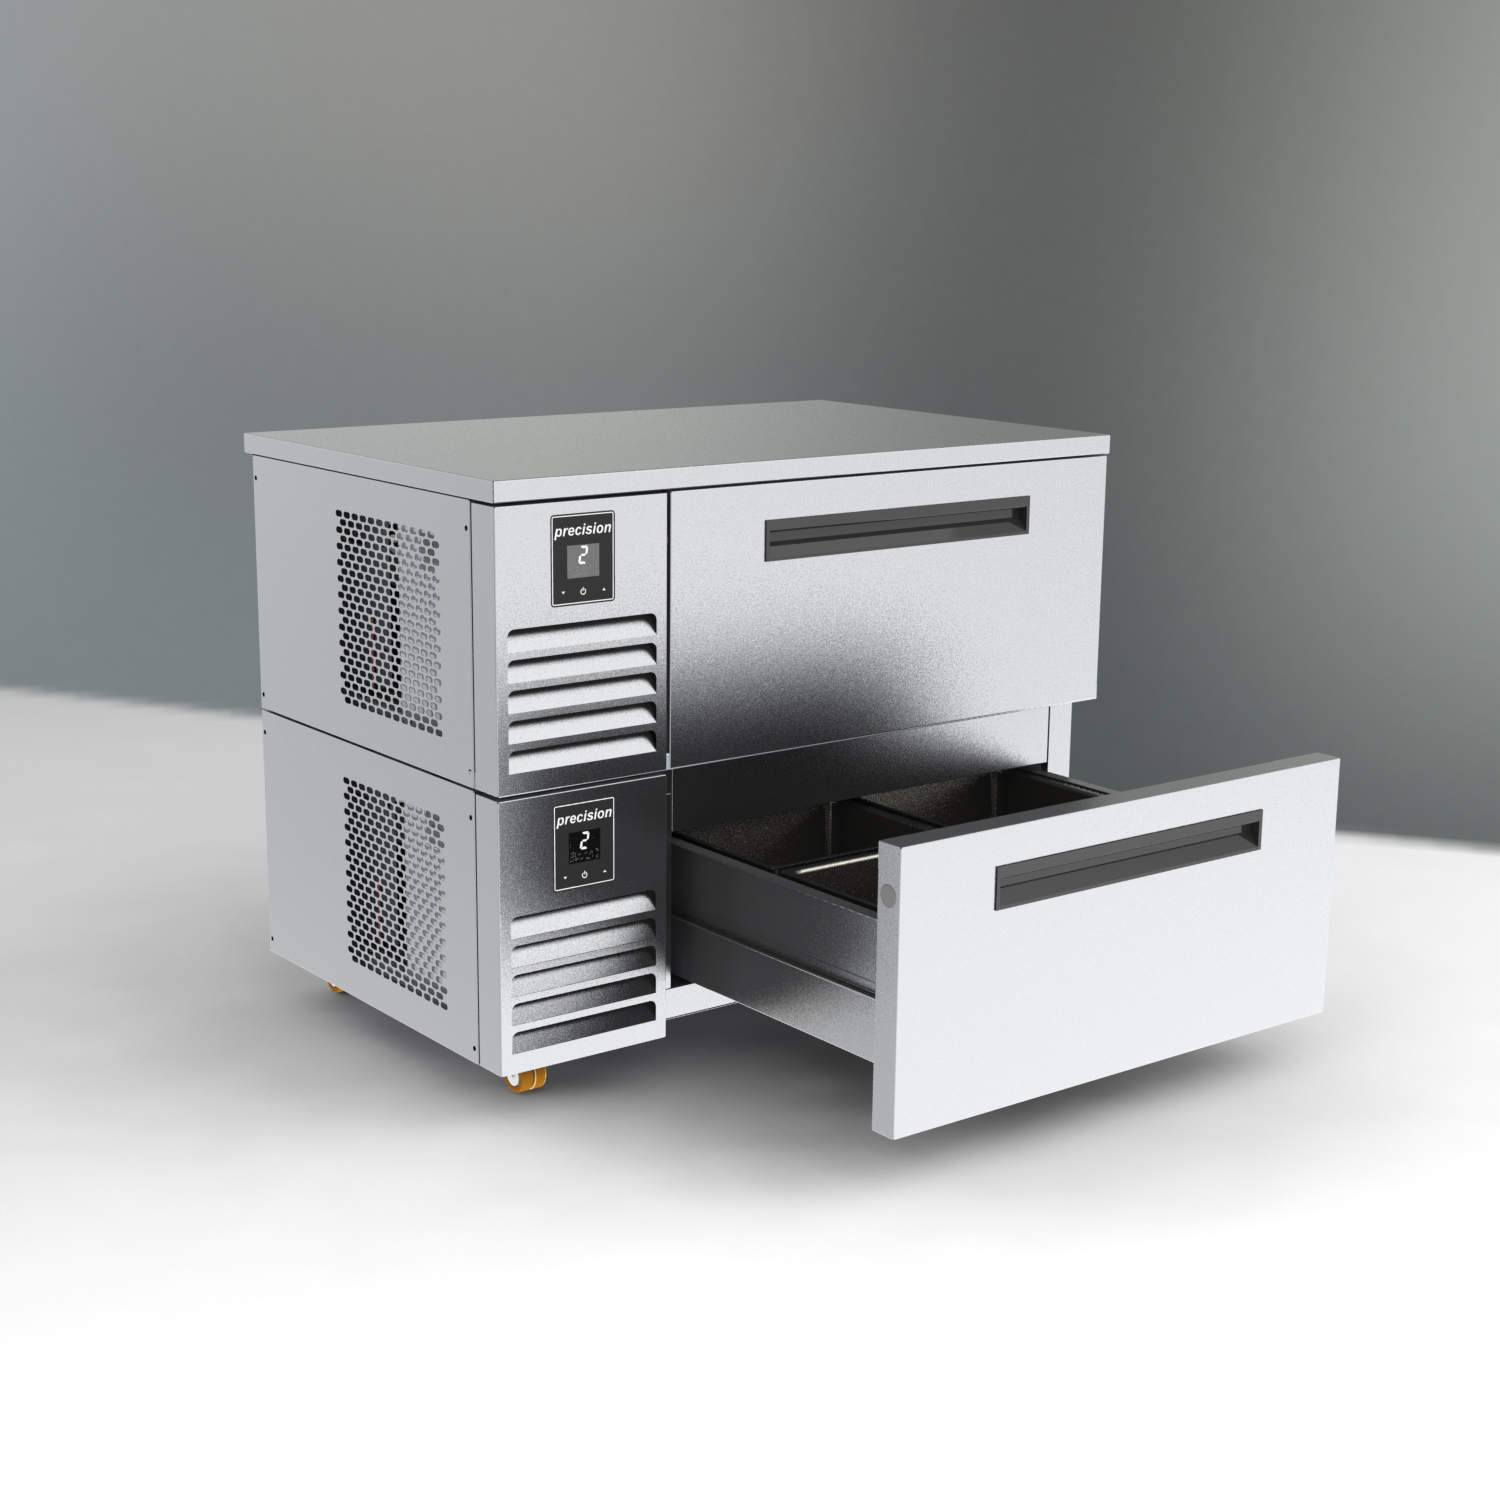 Double up with Precision’s stacking variable temperature drawers